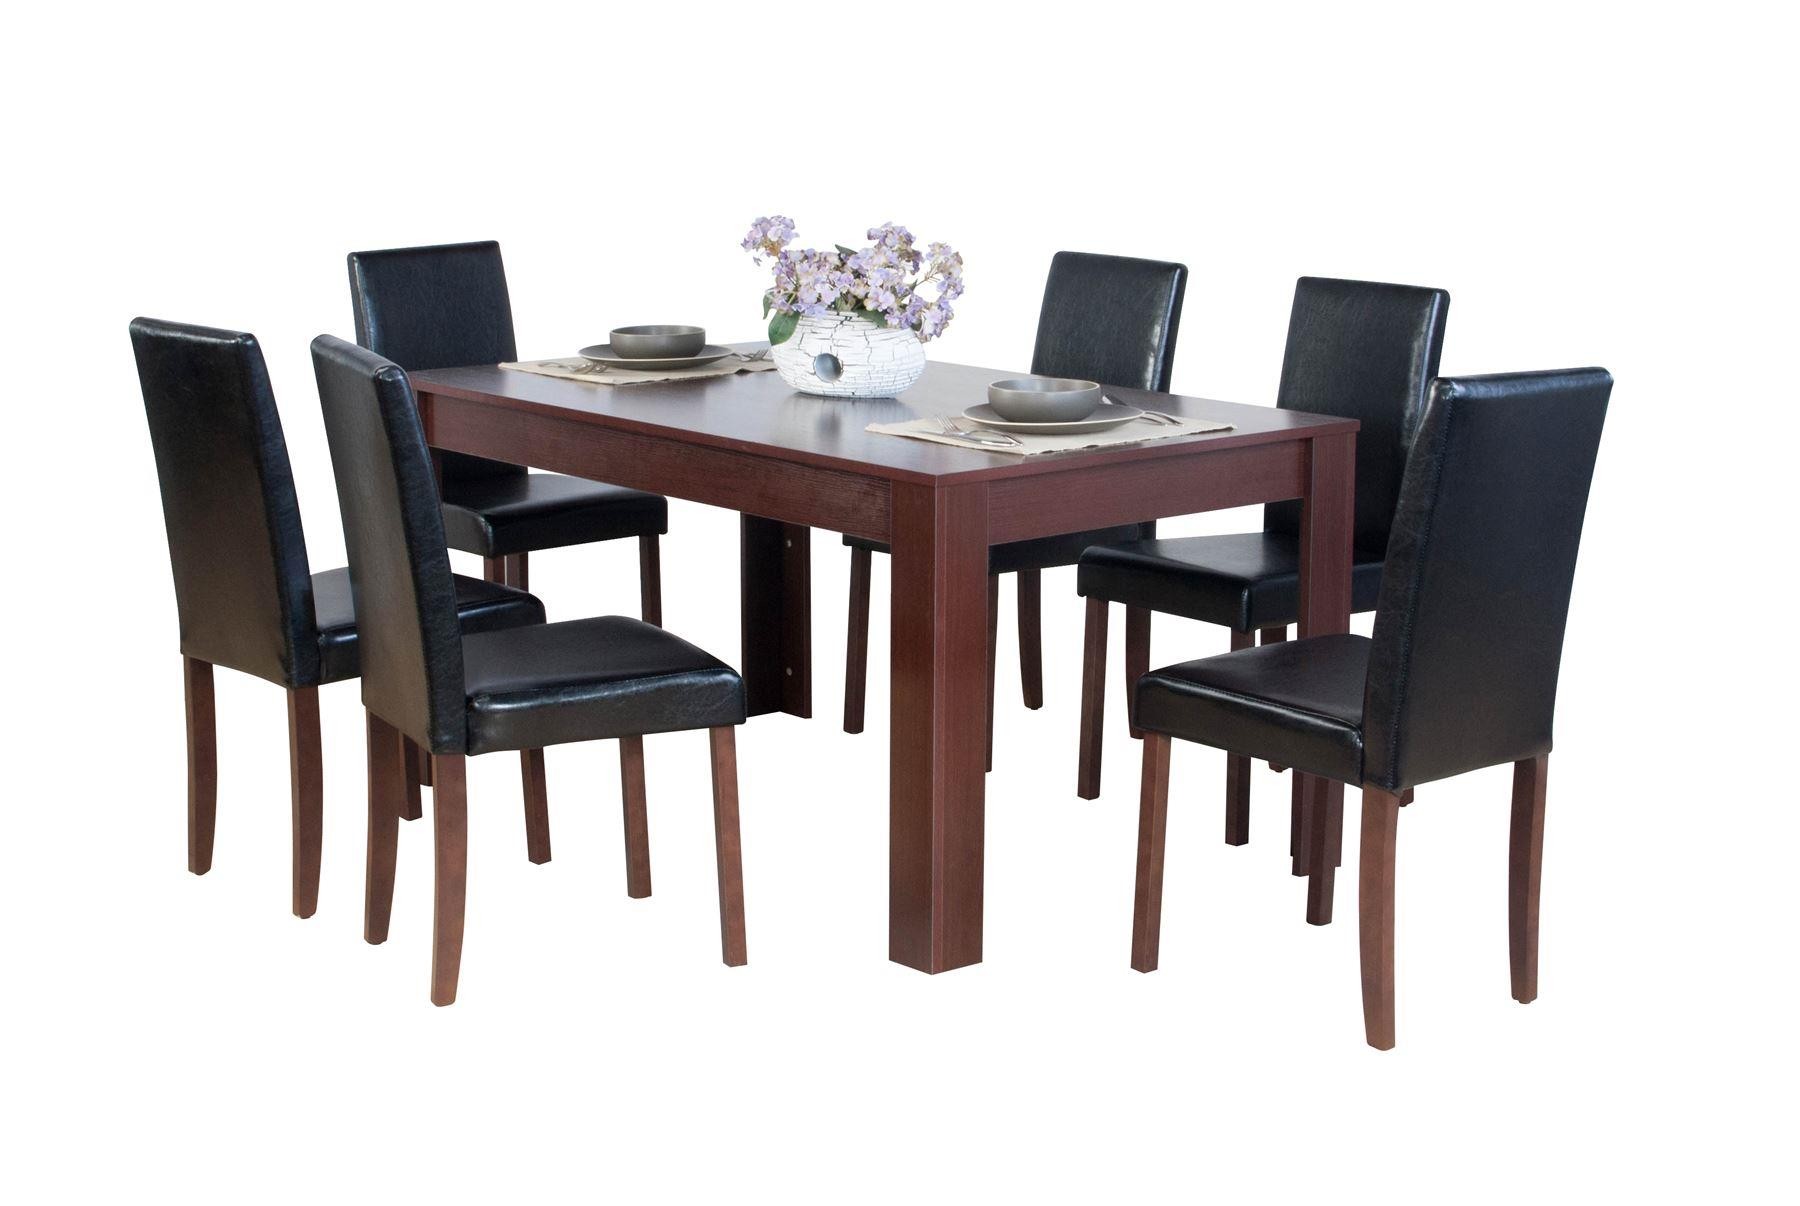 6 chair dining tables